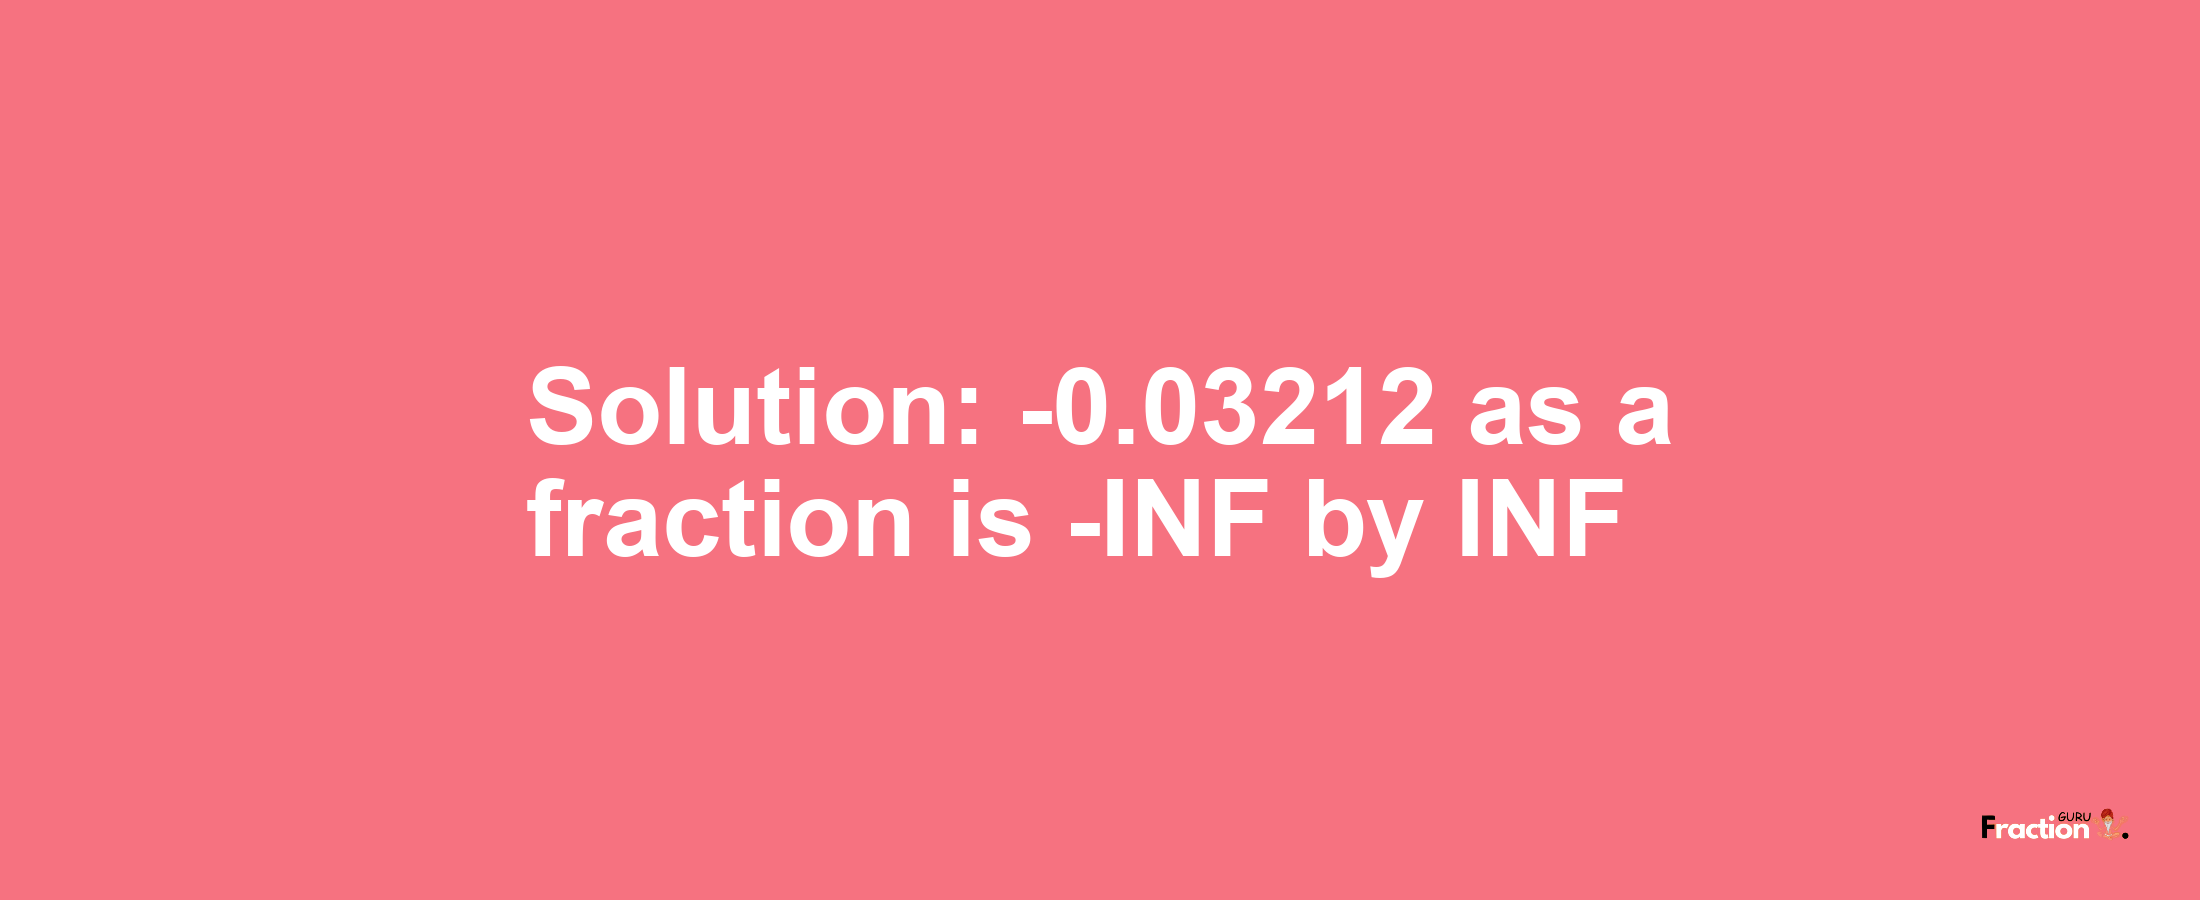 Solution:-0.03212 as a fraction is -INF/INF